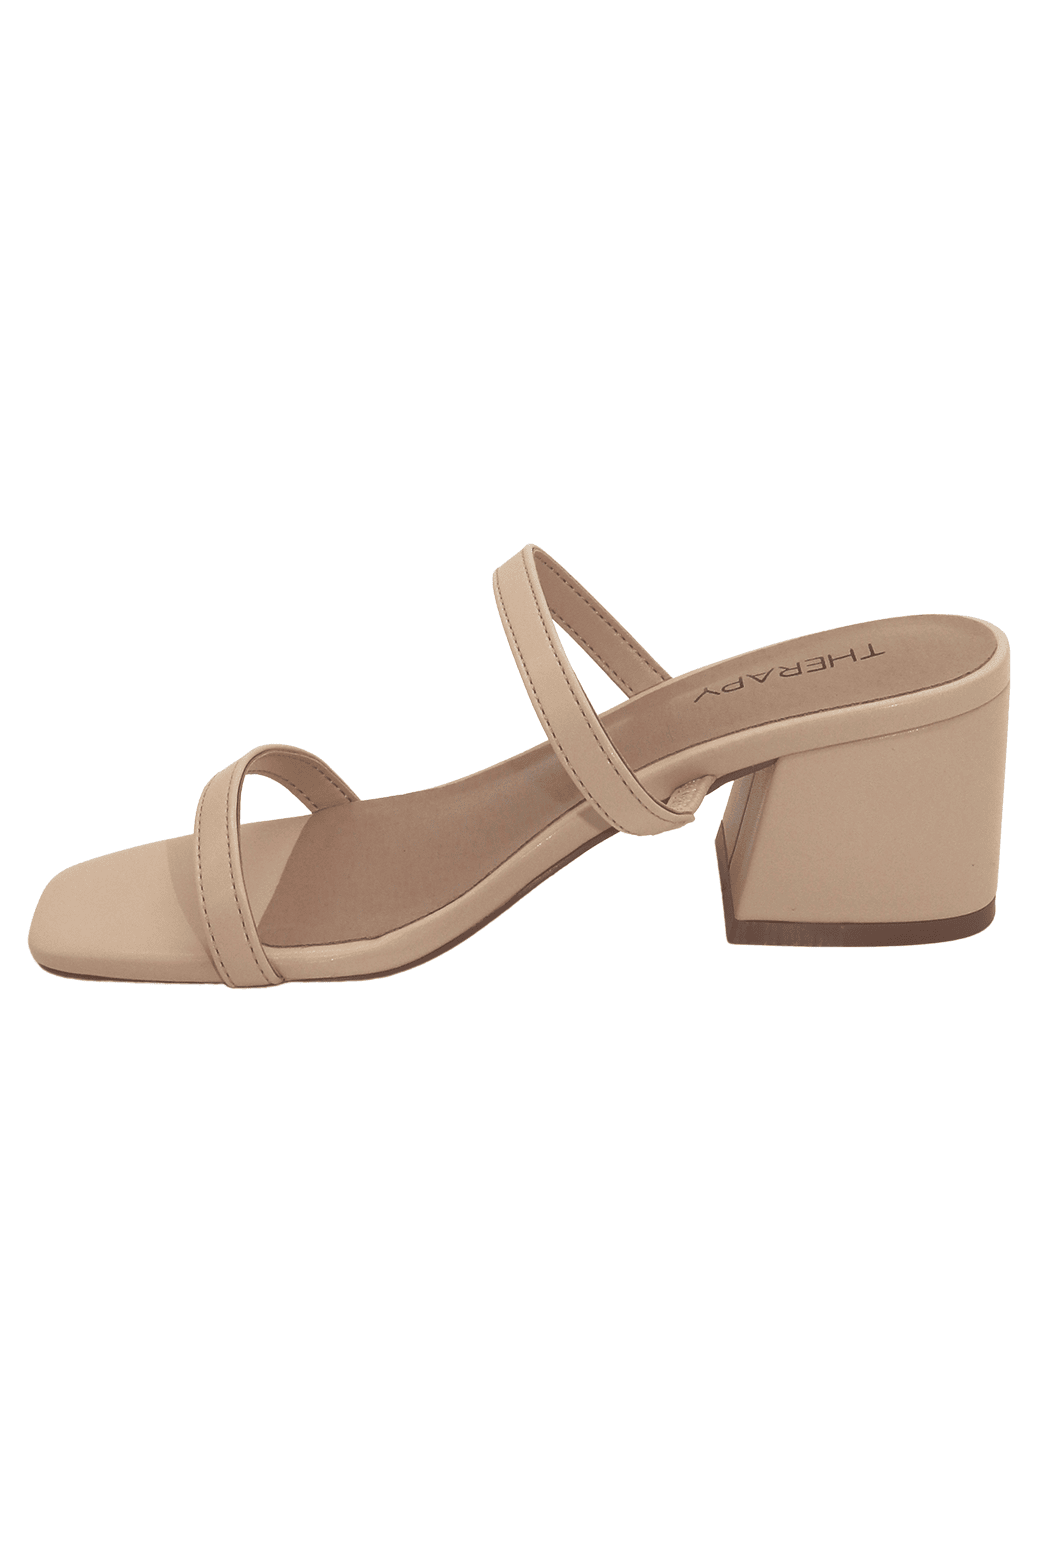 Therapy Goldie Heels Cream